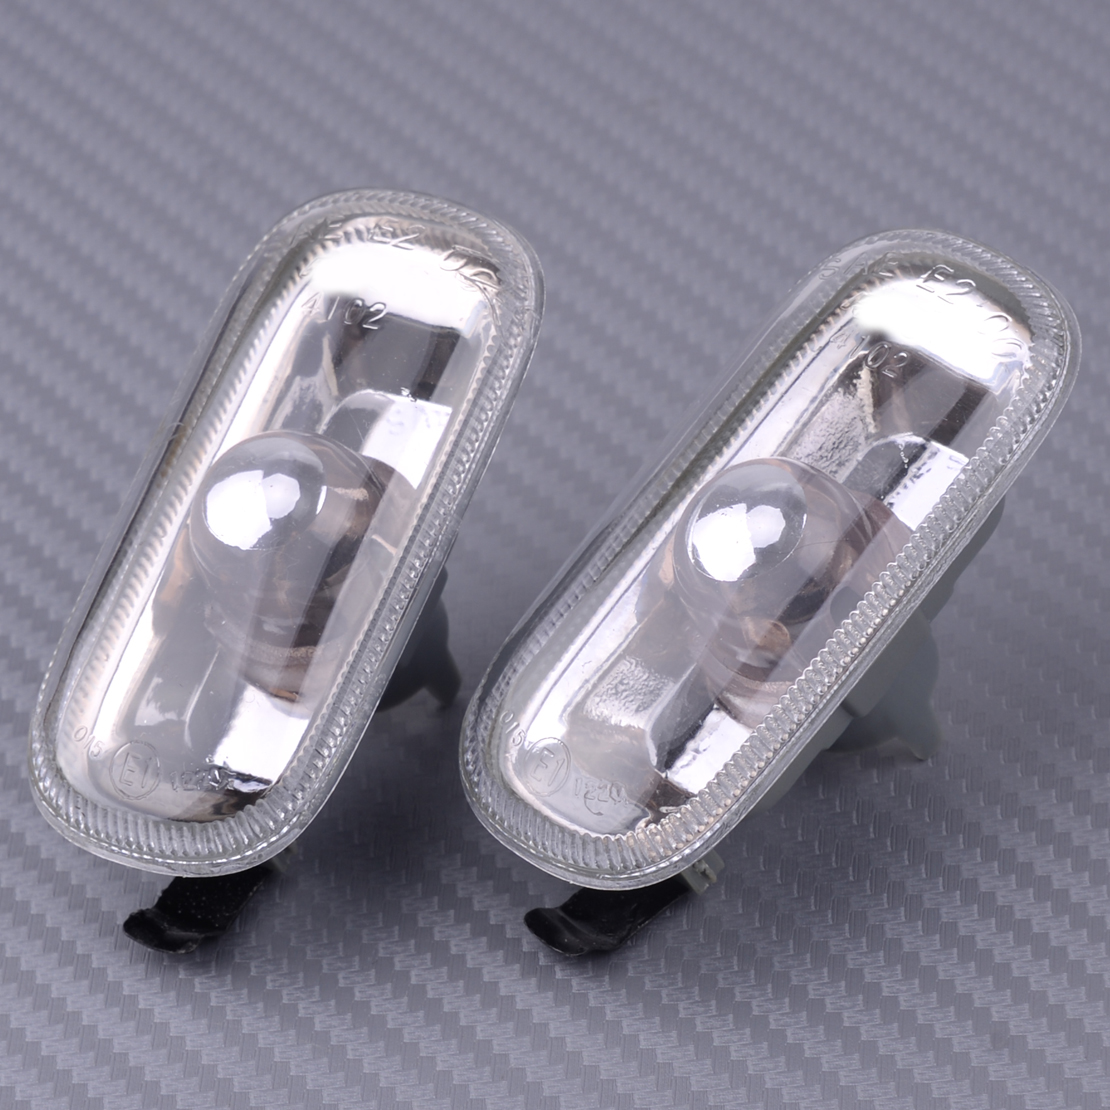 2x Side Marker Fender Turn Signal Light Lamp Fit for Audi A3 A4 A6 Quattro S4 S6 | eBay 2004 Audi A4 Turn Signal Bulb Replacement